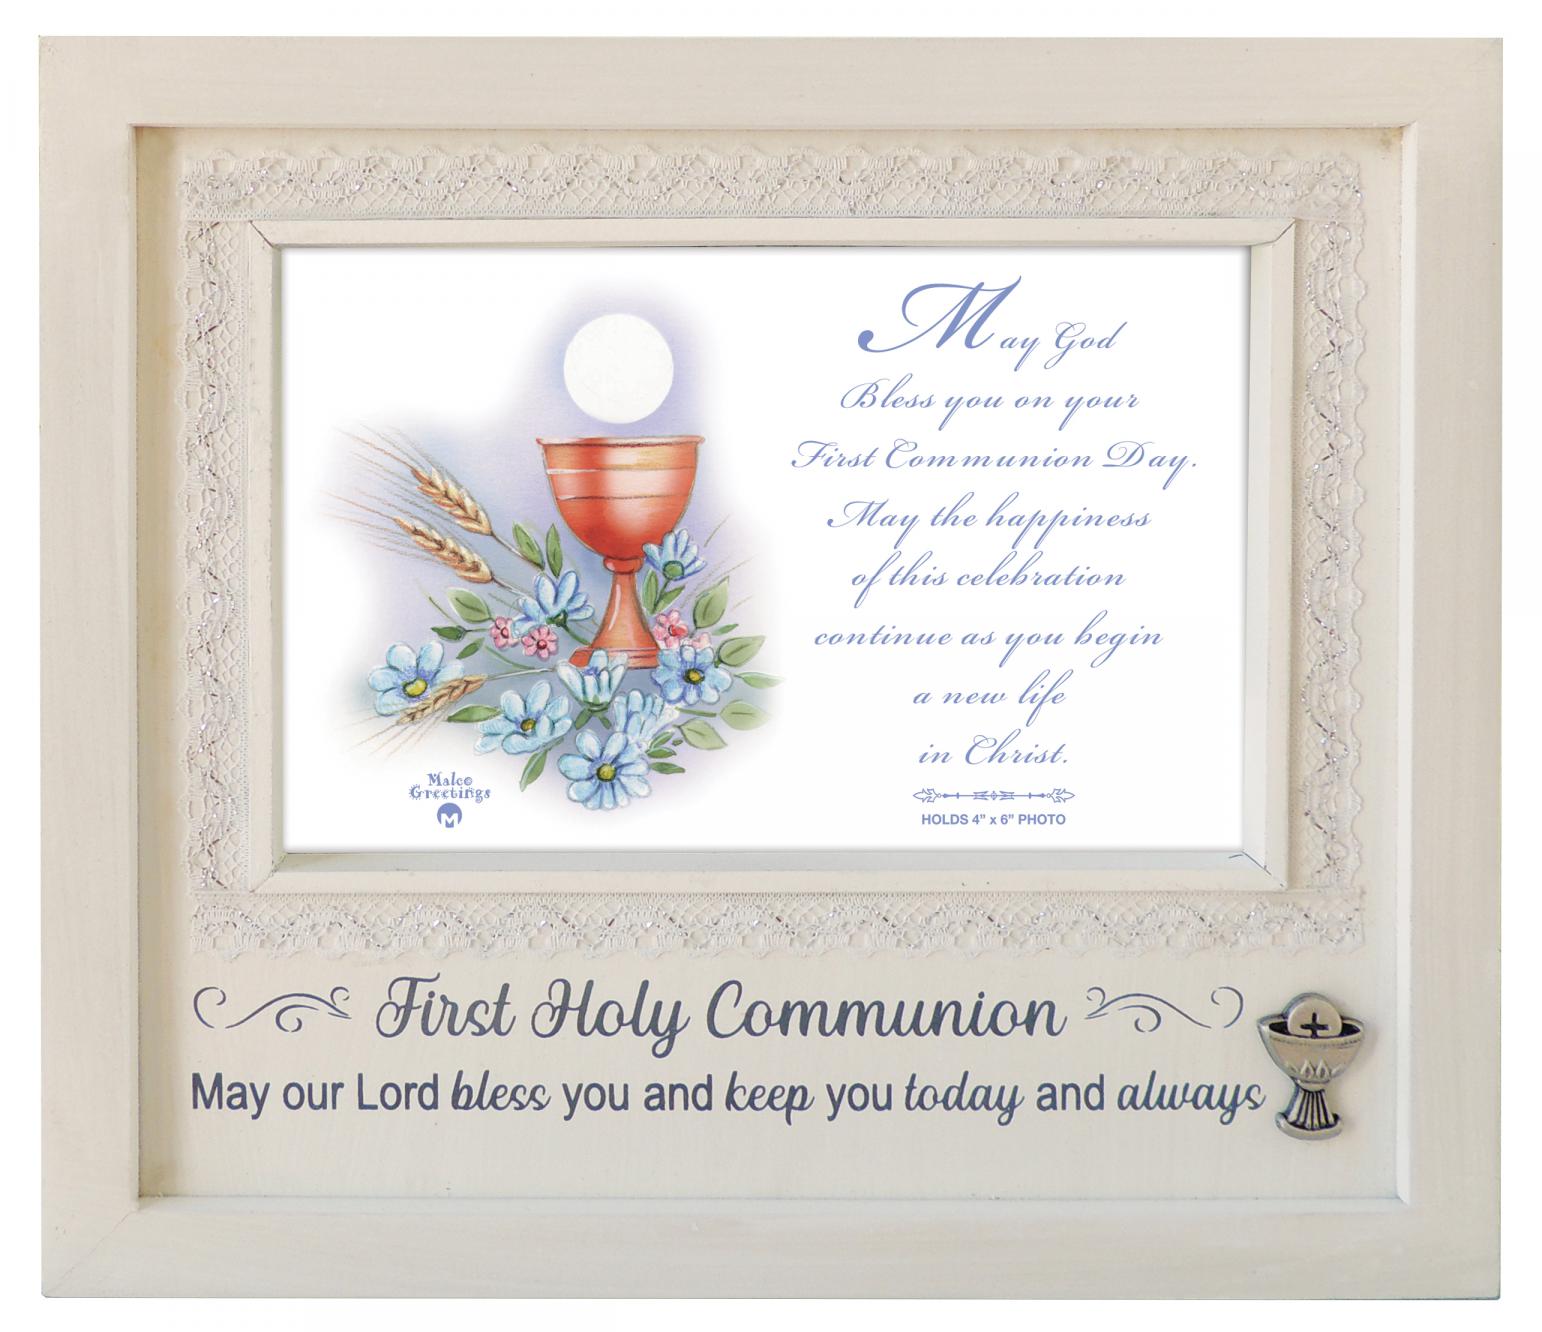 7.5in x8.5in Wood First Communion frame w/Lace & Metal Accent hangs or stands - holds 4in x6in photo